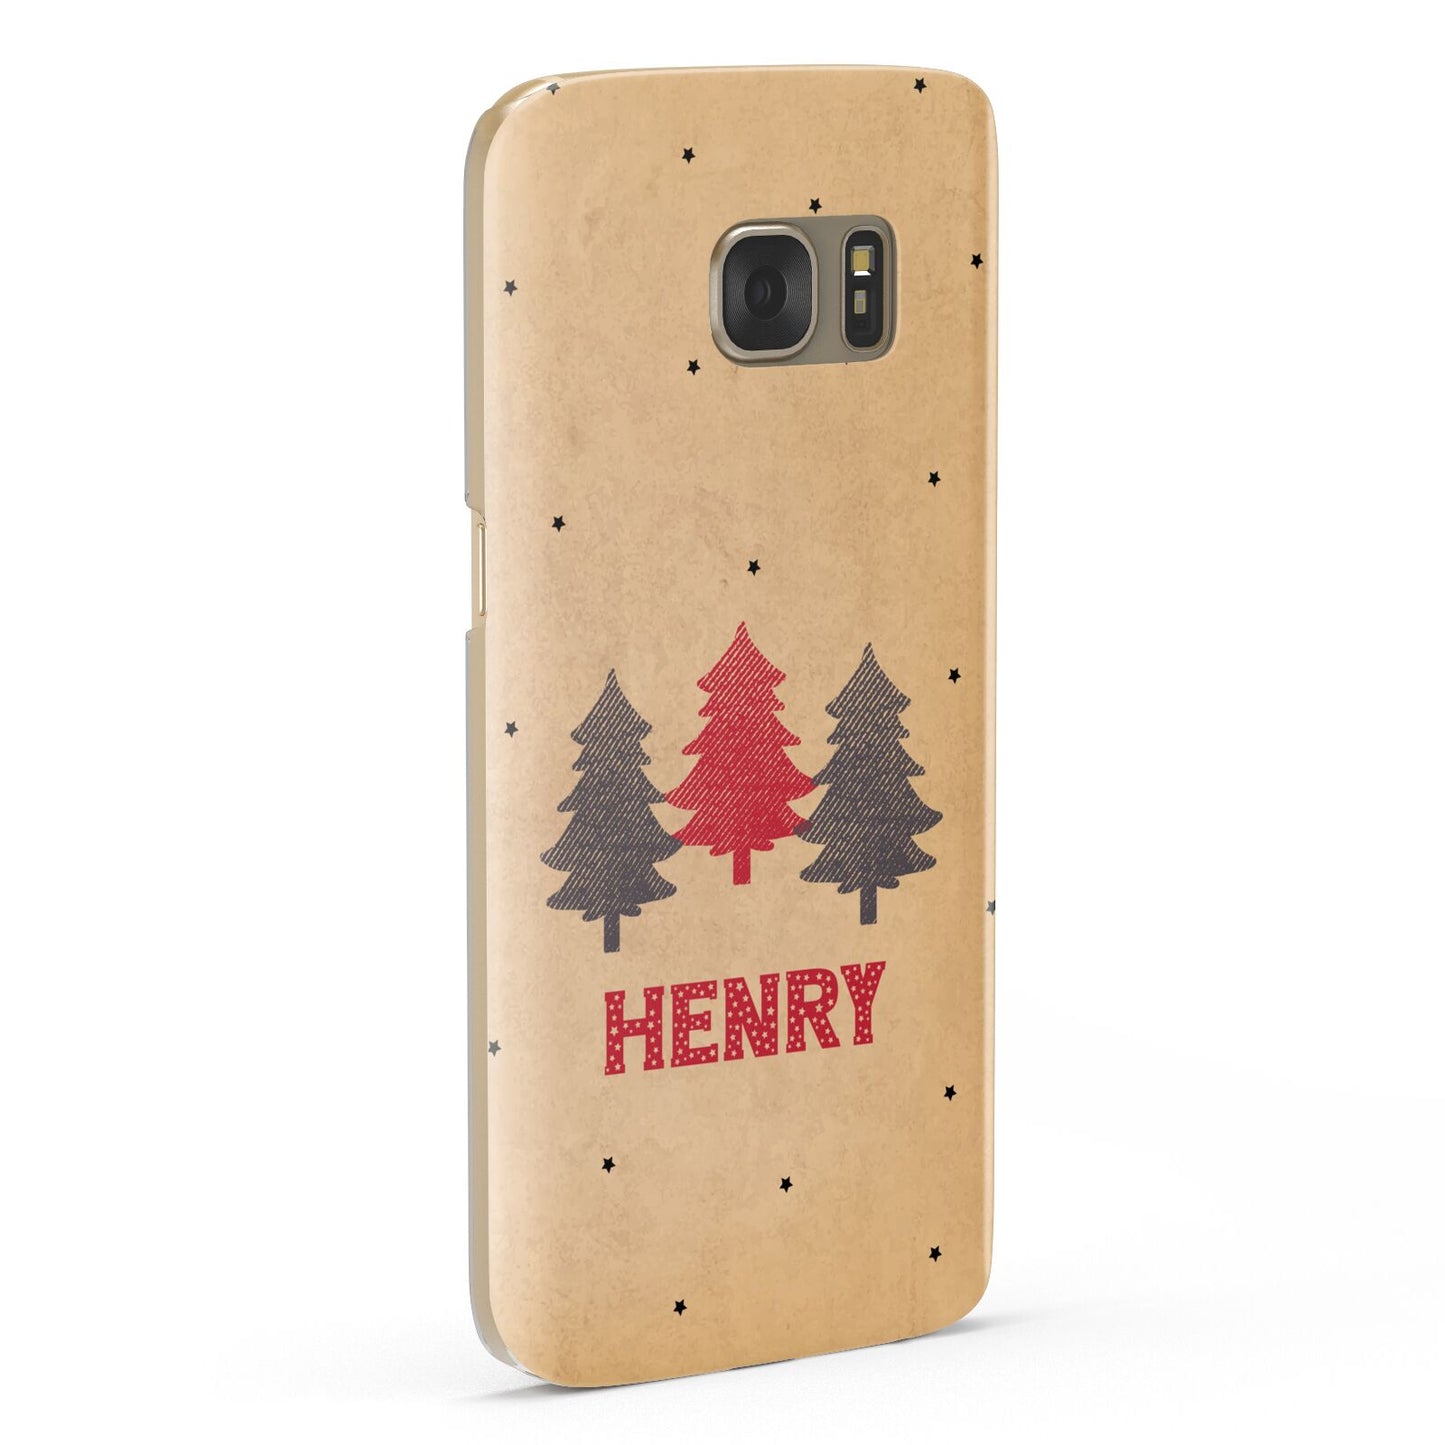 Personalised Christmas Tree Samsung Galaxy Case Fourty Five Degrees